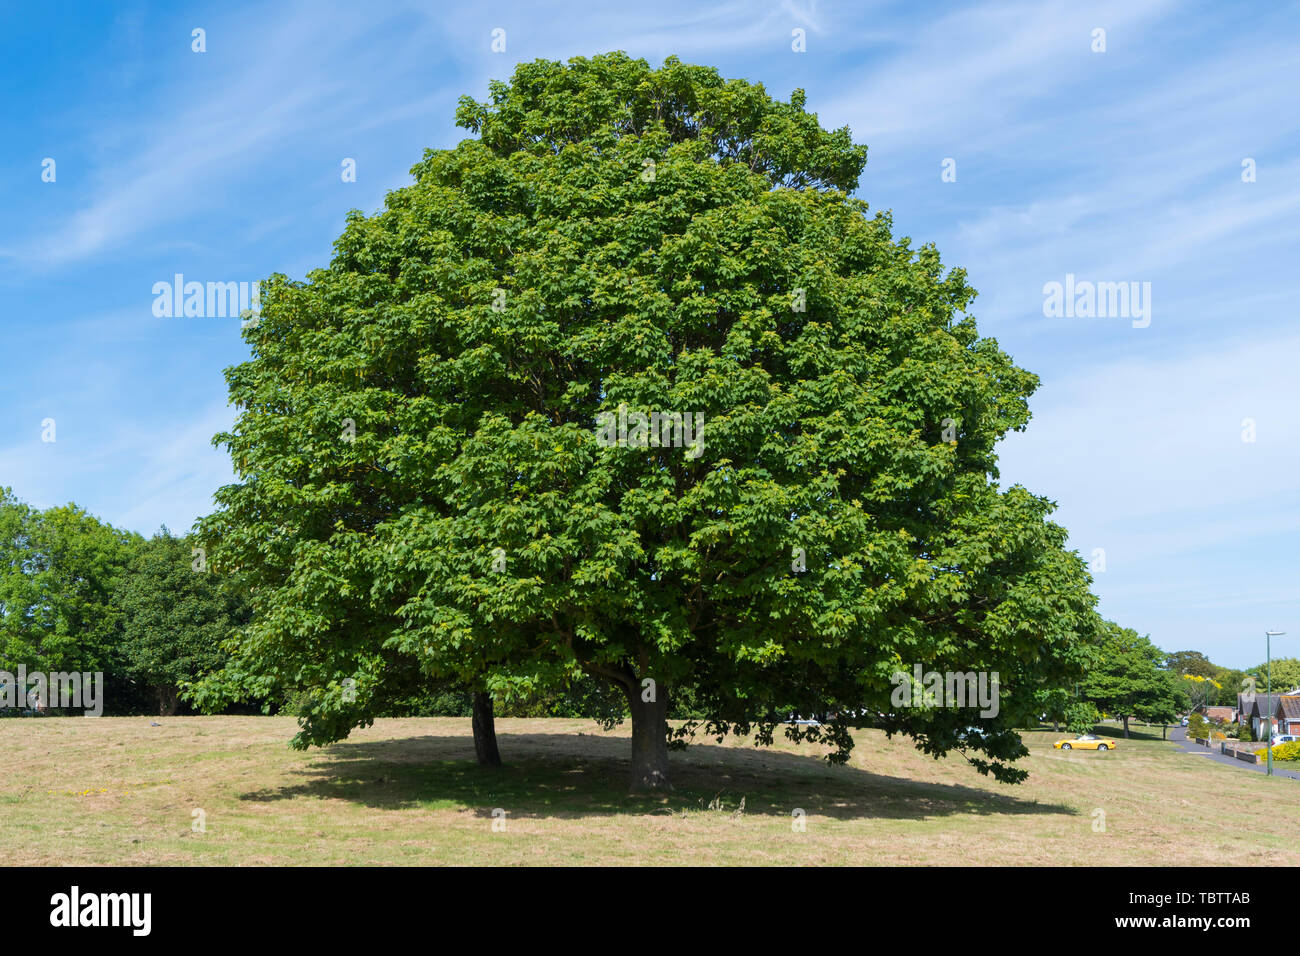 Sycamore tree (Acer pseudoplatanus, Sycamore maple in USA) against blue sky in early Summer (June) in England, UK. Stock Photo